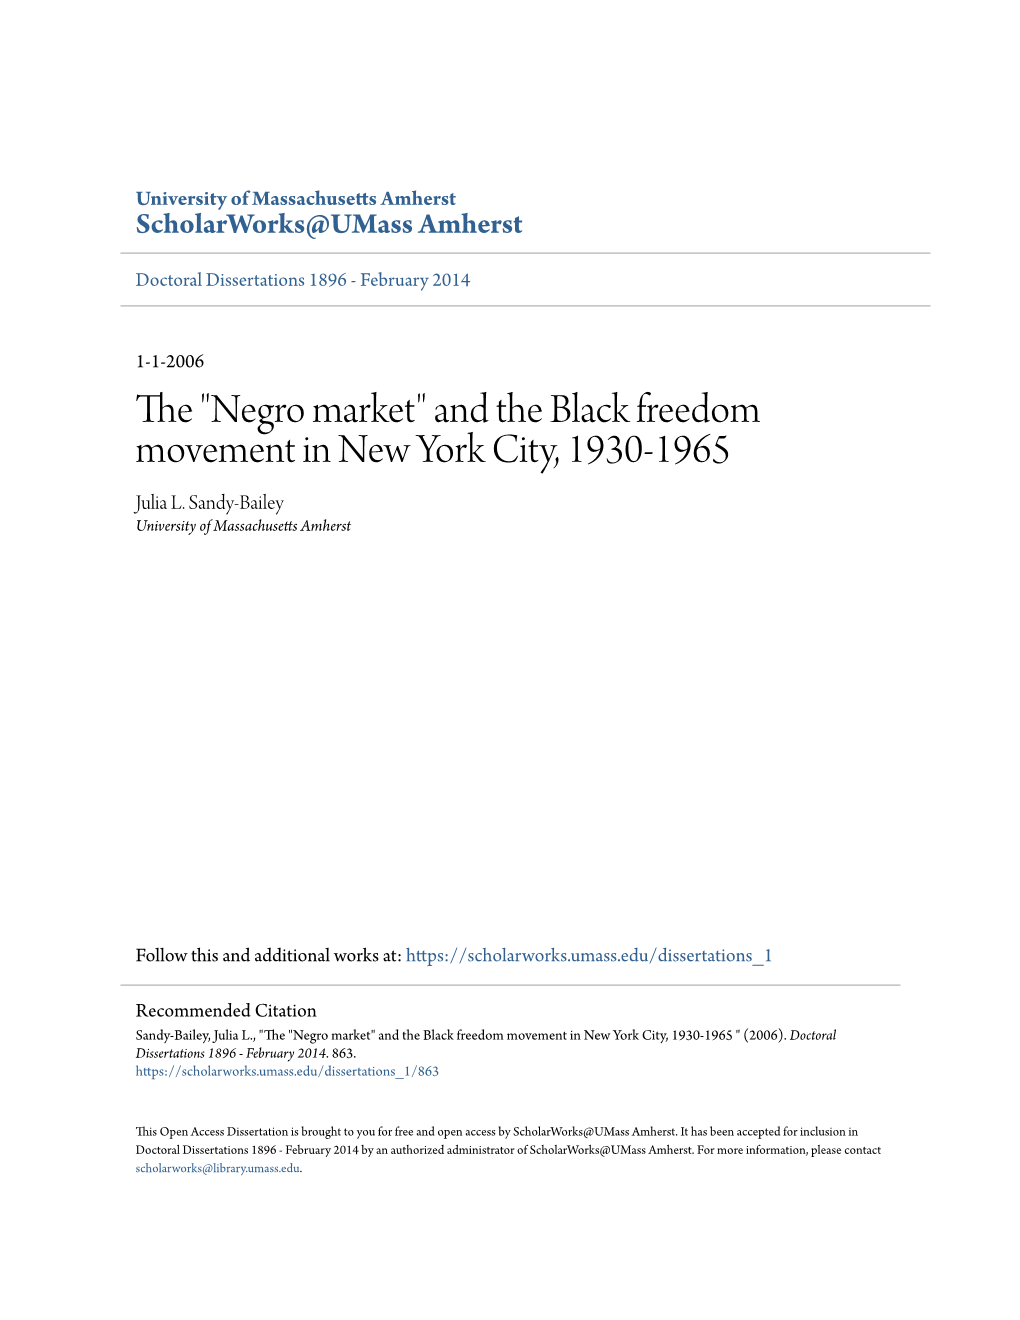 Negro Market" and the Black Freedom Movement in New York City, 1930-1965 Julia L